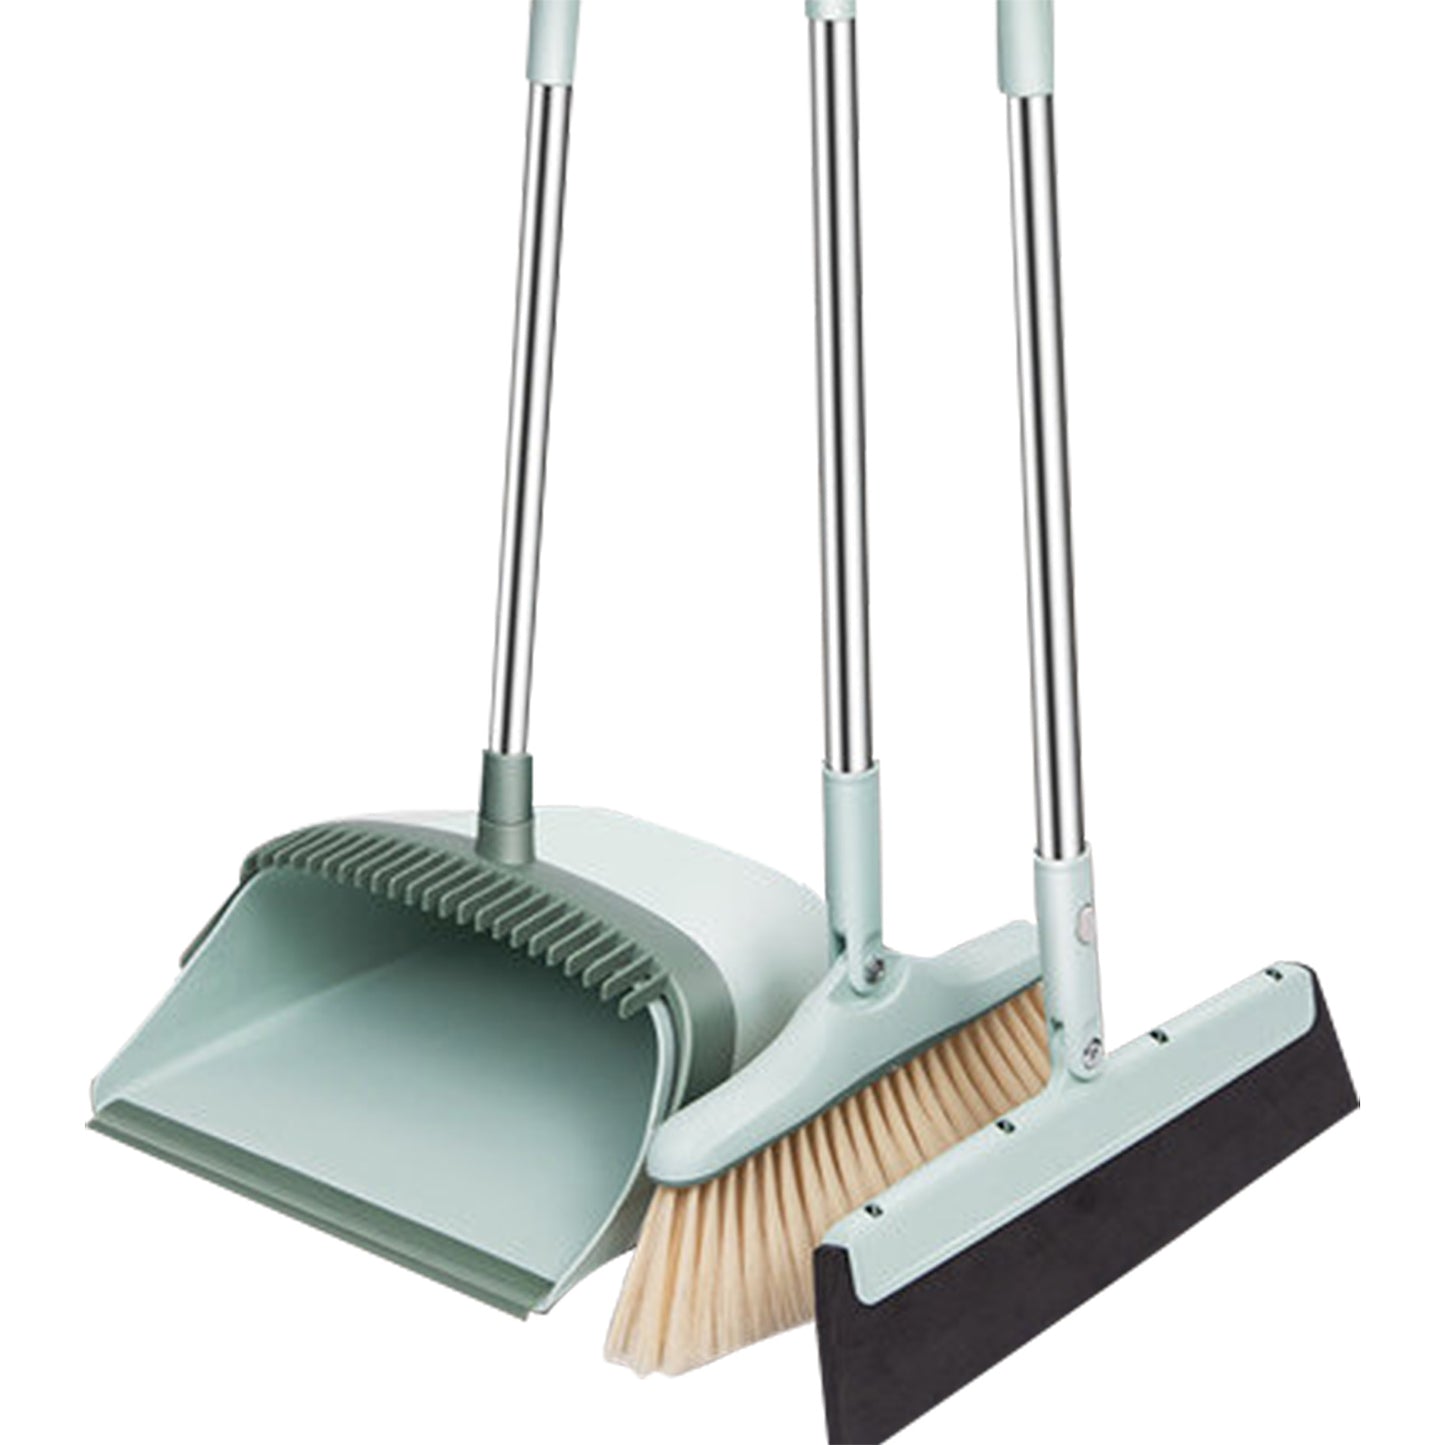 Broom, Dustpan, Broom, 2 Piece Set, Stylish, Entrance Broom, Cleaning Tool, For Indoors and Outdoors, Compact, Freestanding, Dustpan